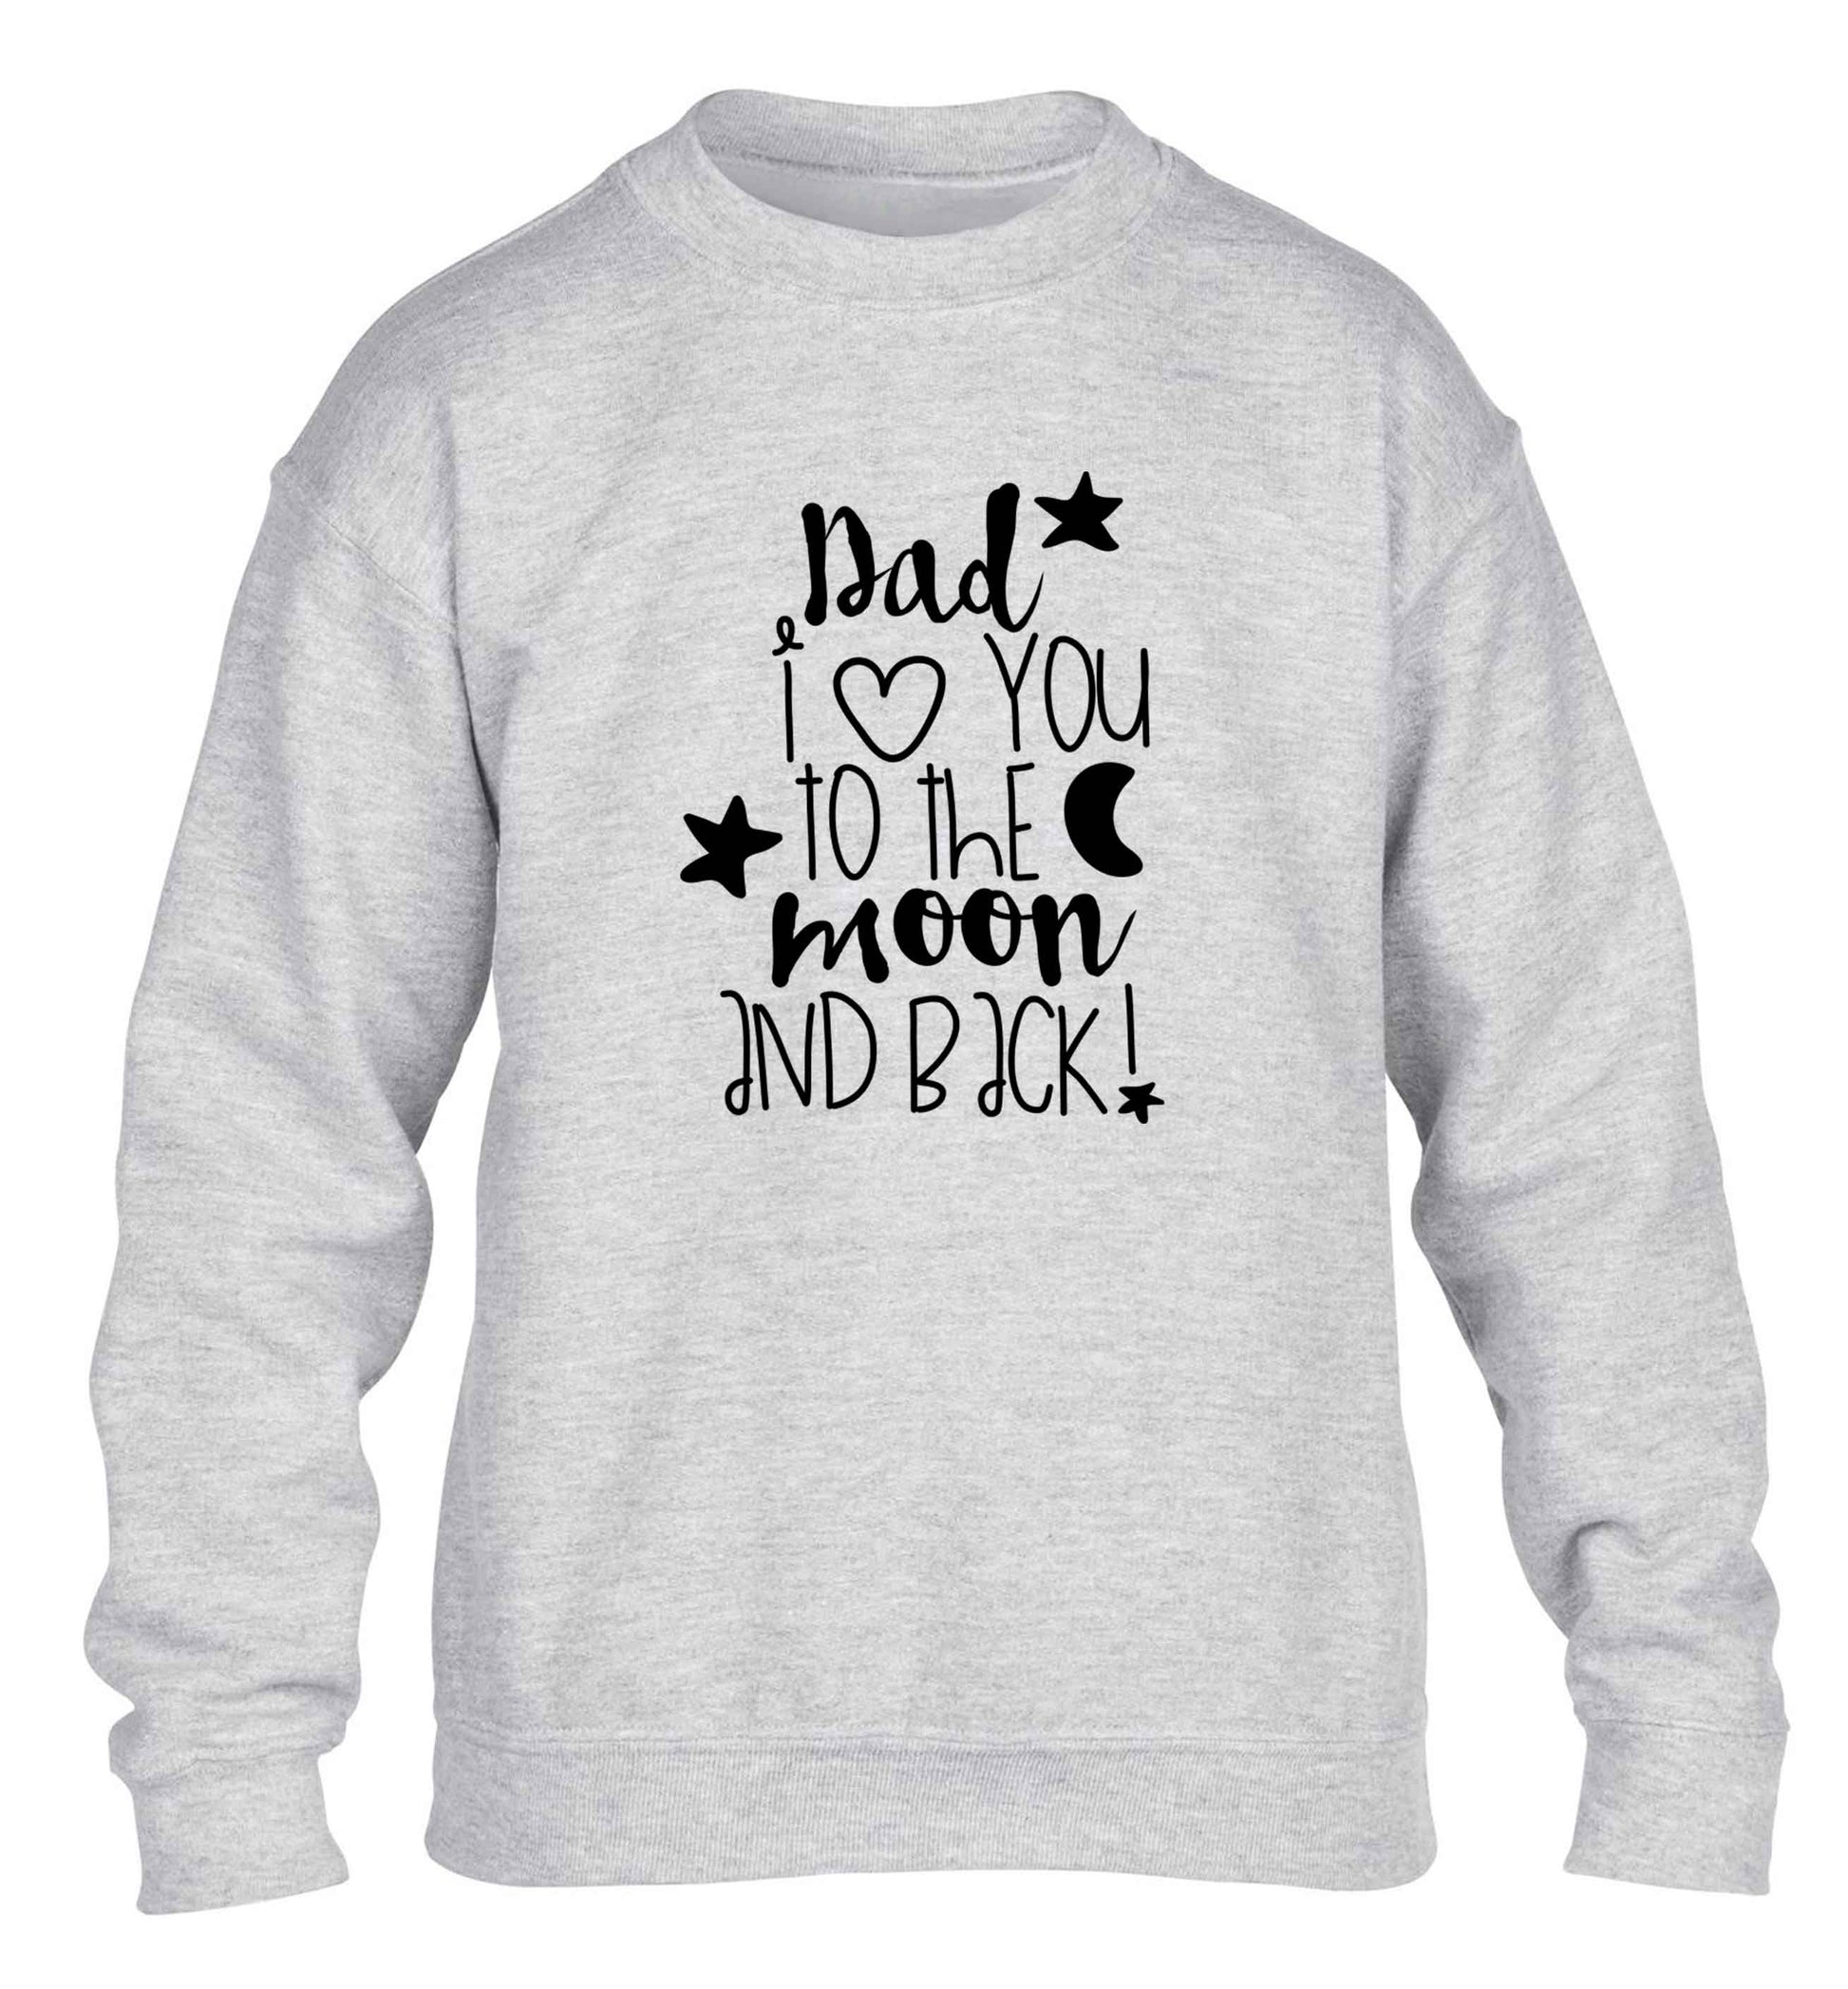 Dad I love you to the moon and back children's grey sweater 12-13 Years